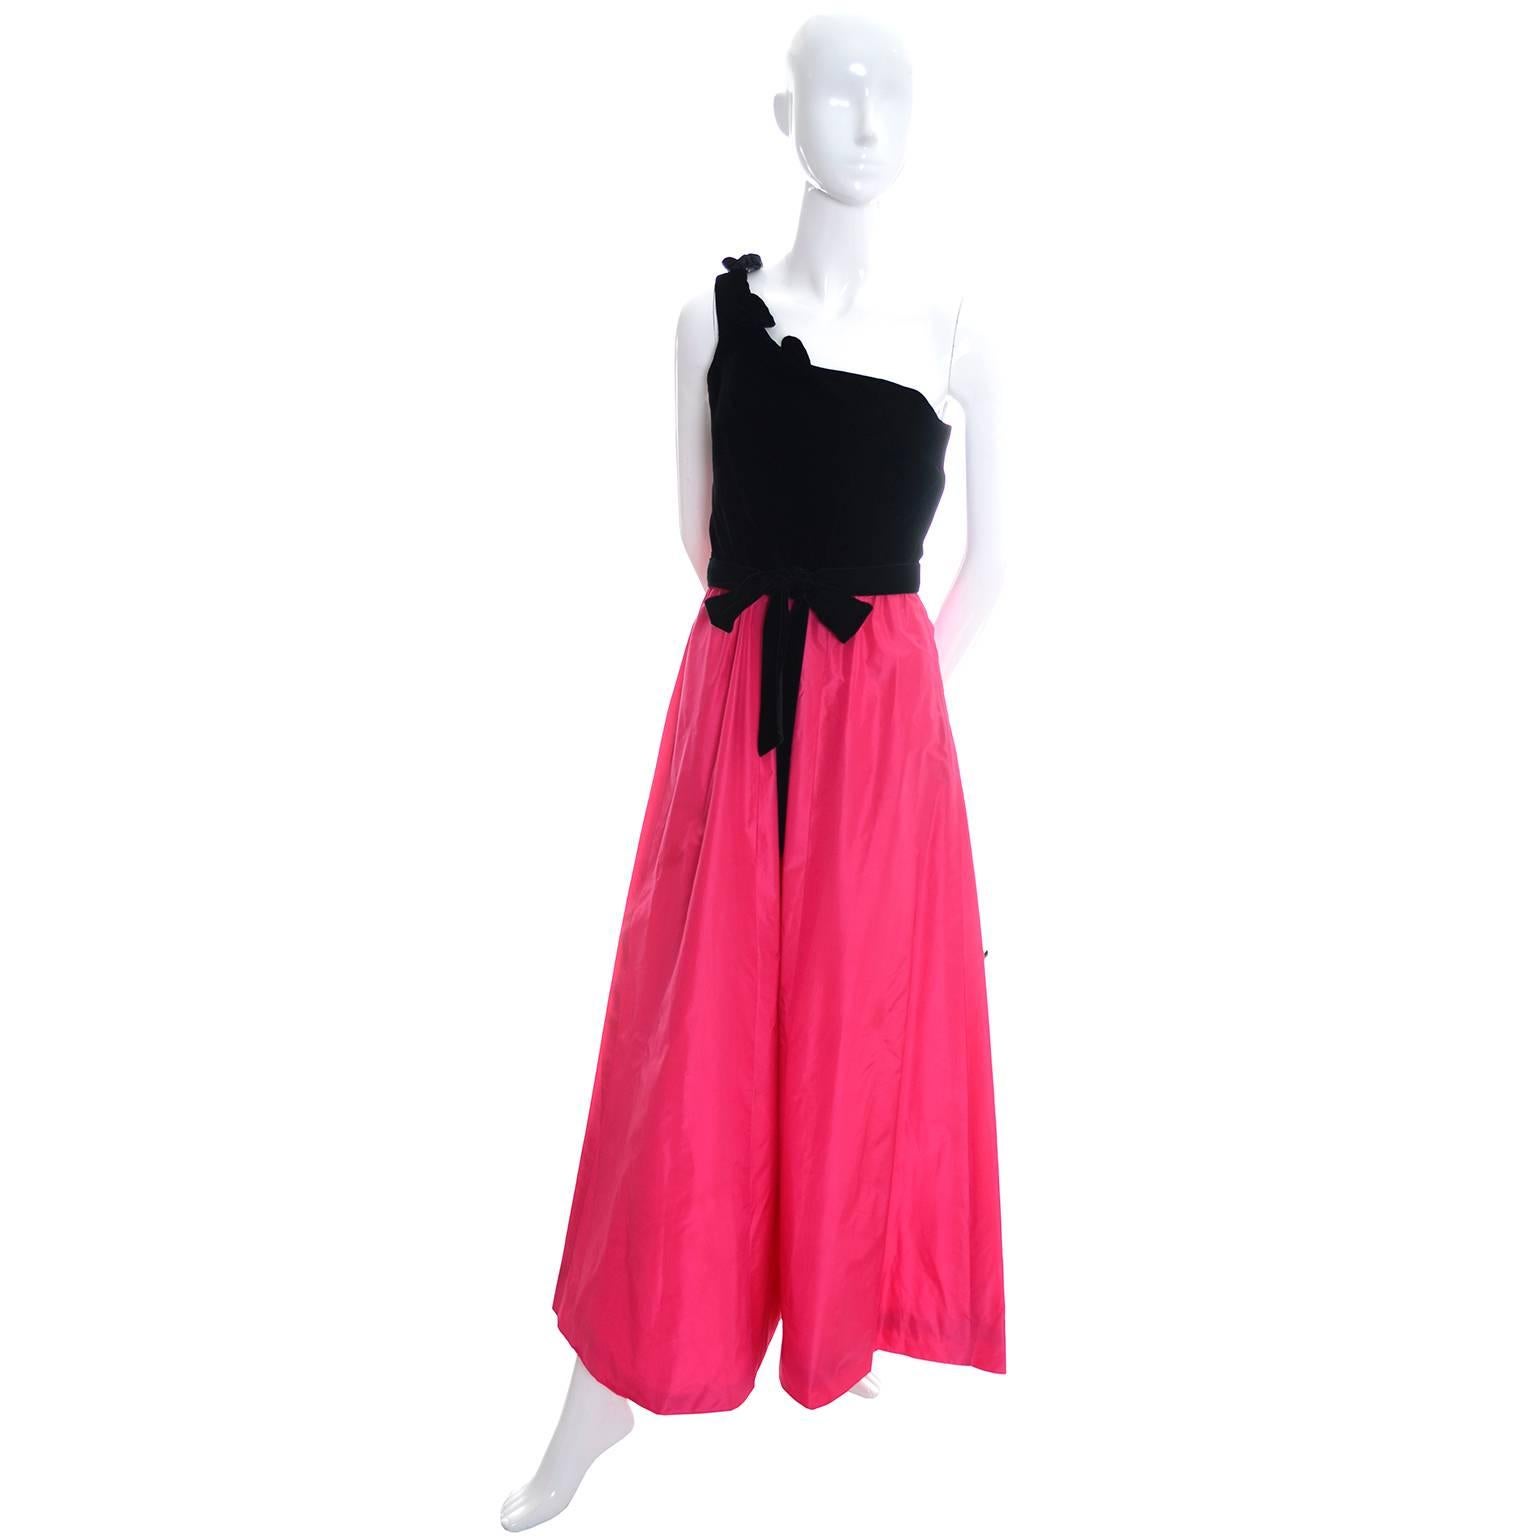 This pretty late 1980's one shoulder vintage dress is from Eugene Alexander of Sarasota Florida.  The bodice of the dress is black velvet with pretty velvet leaves along the shoulder and the skirt is a beautiful pink taffeta satin.  There is a side